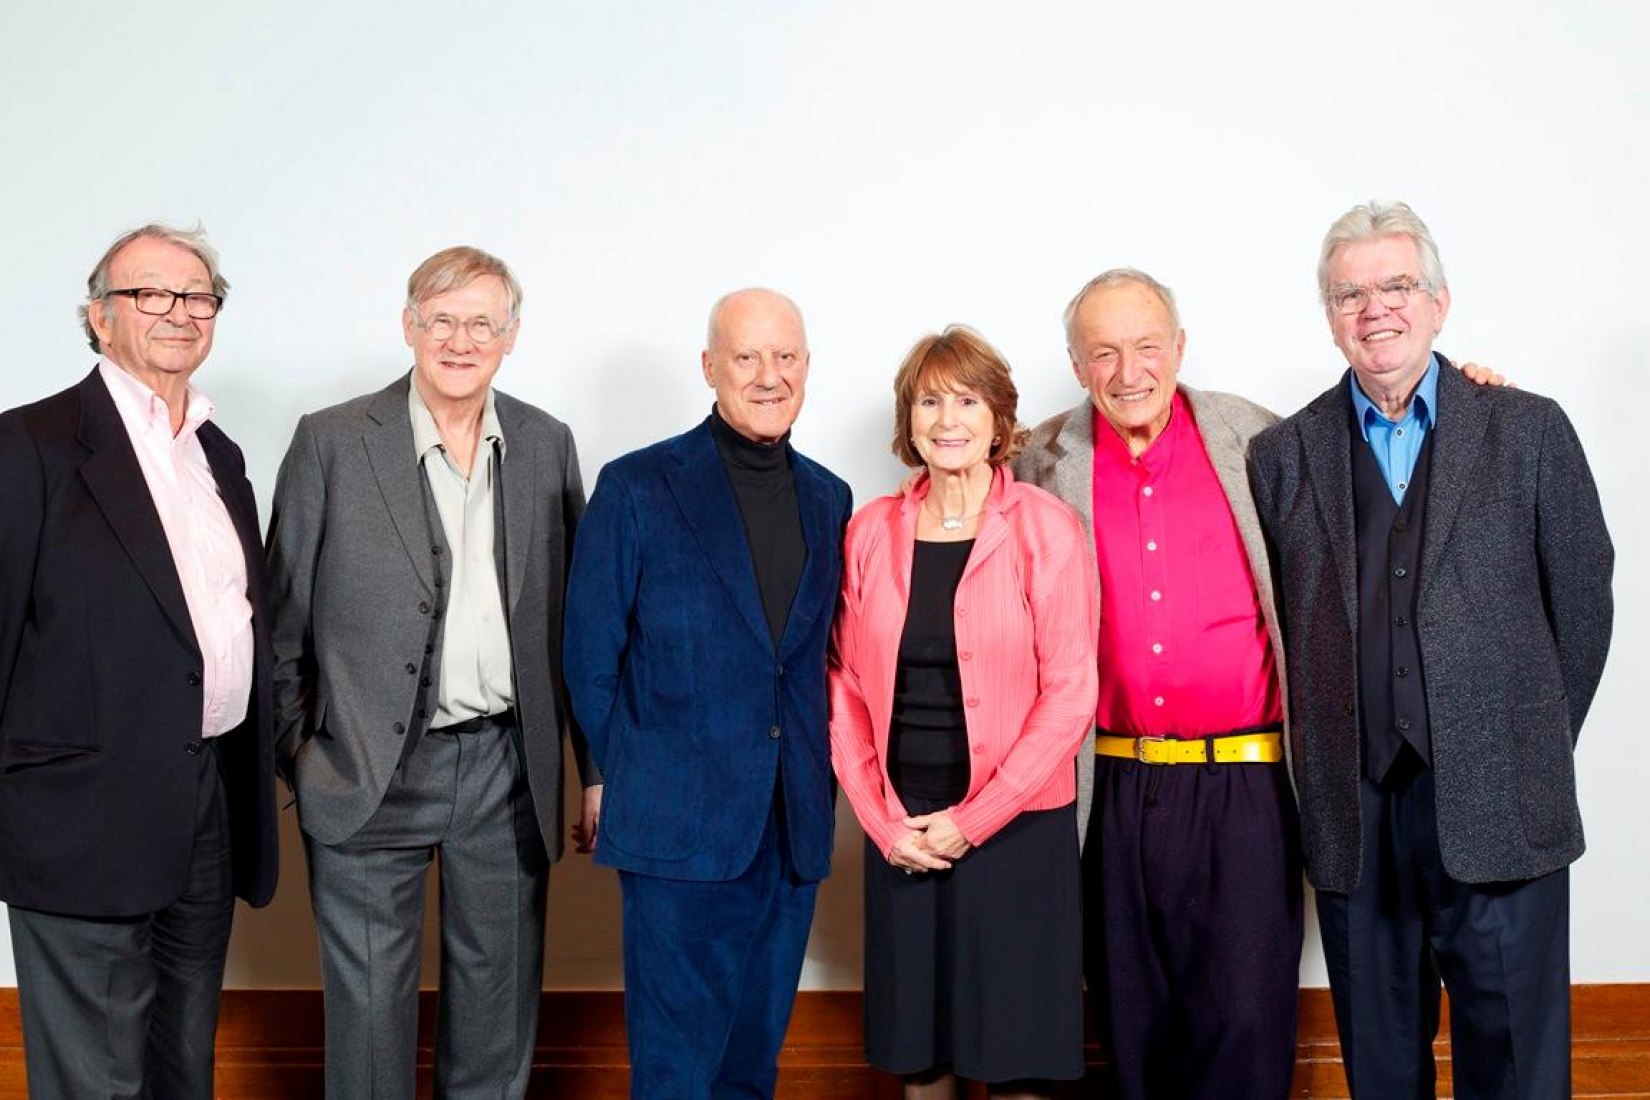 Original version of this image, taken at the opening of the RIBA exhibition ‘The Brits Who Built the Modern World,’ Patty Hopkins is between Norman Foster and Richard Rogers. In this version, used in the BBC series, she is conspicuously remove. Image Courtesy of Architect’s Journal